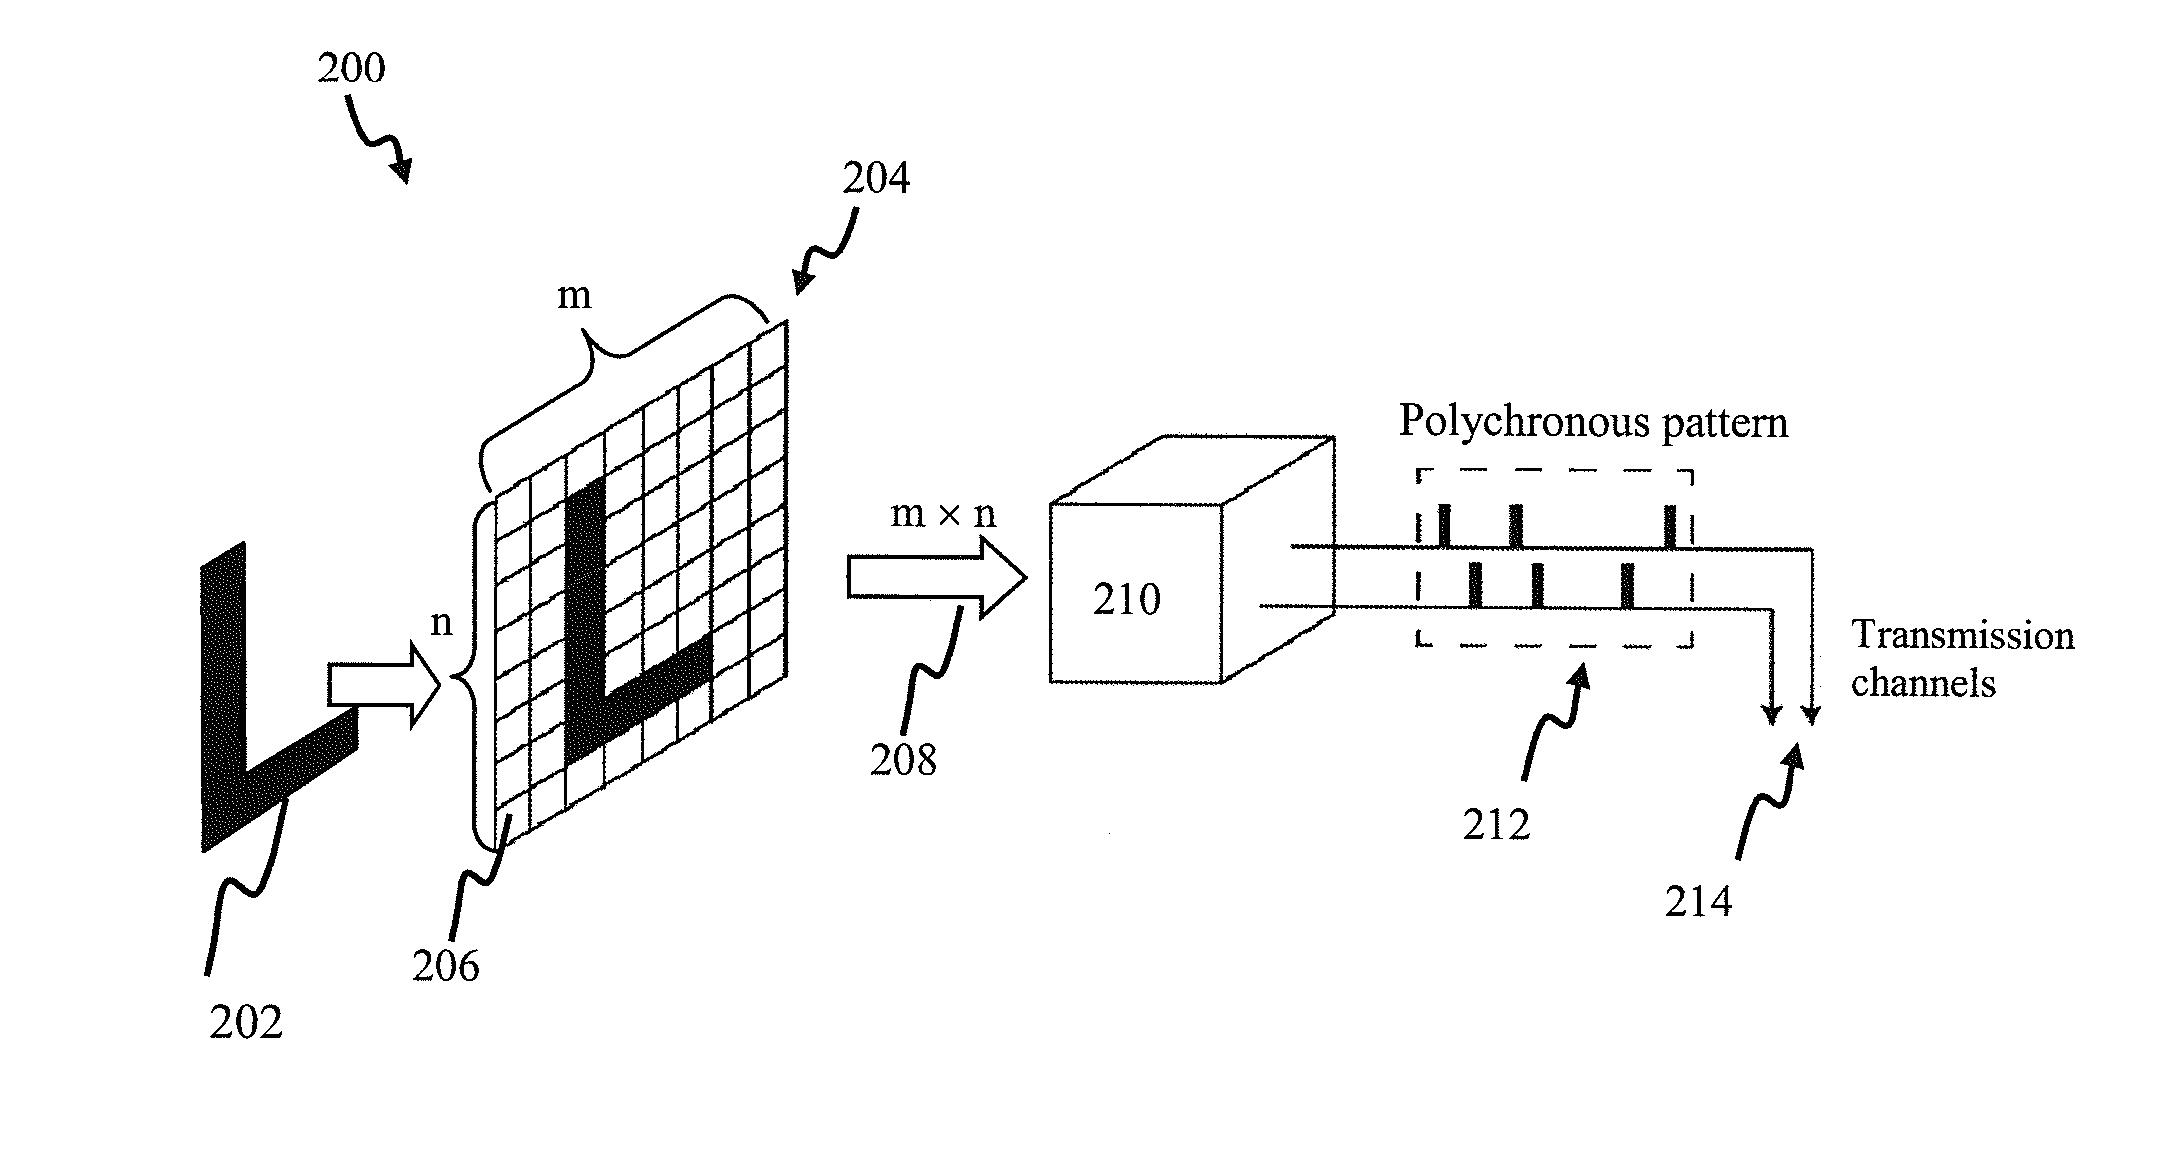 Apparatus and methods for polychronous encoding and multiplexing in neuronal prosthetic devices